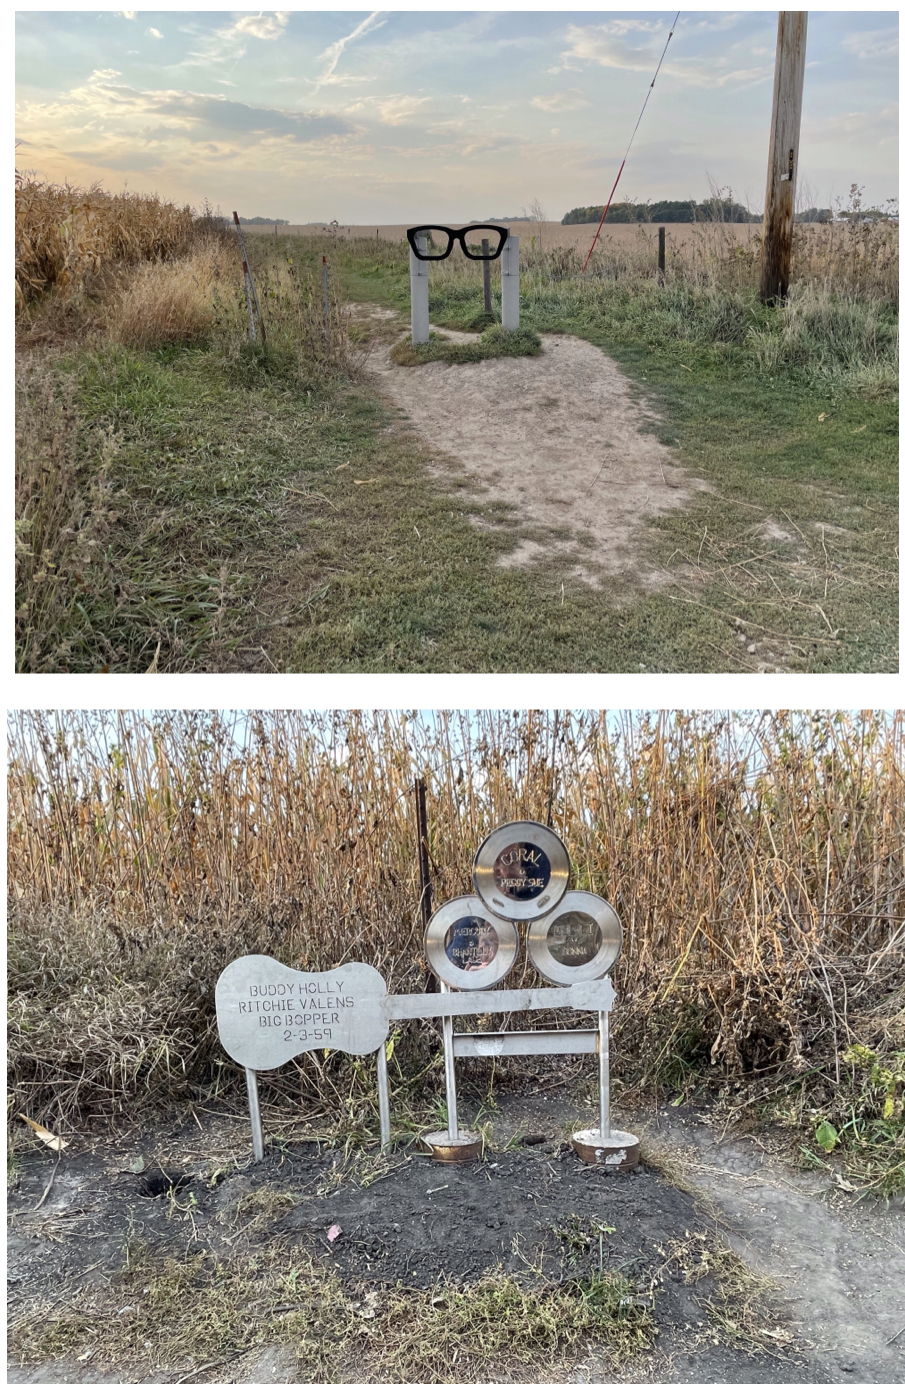 The marker at the road (top) and the memorial at the crash site (bottom).  Photos taken by and the property of FourWalls.